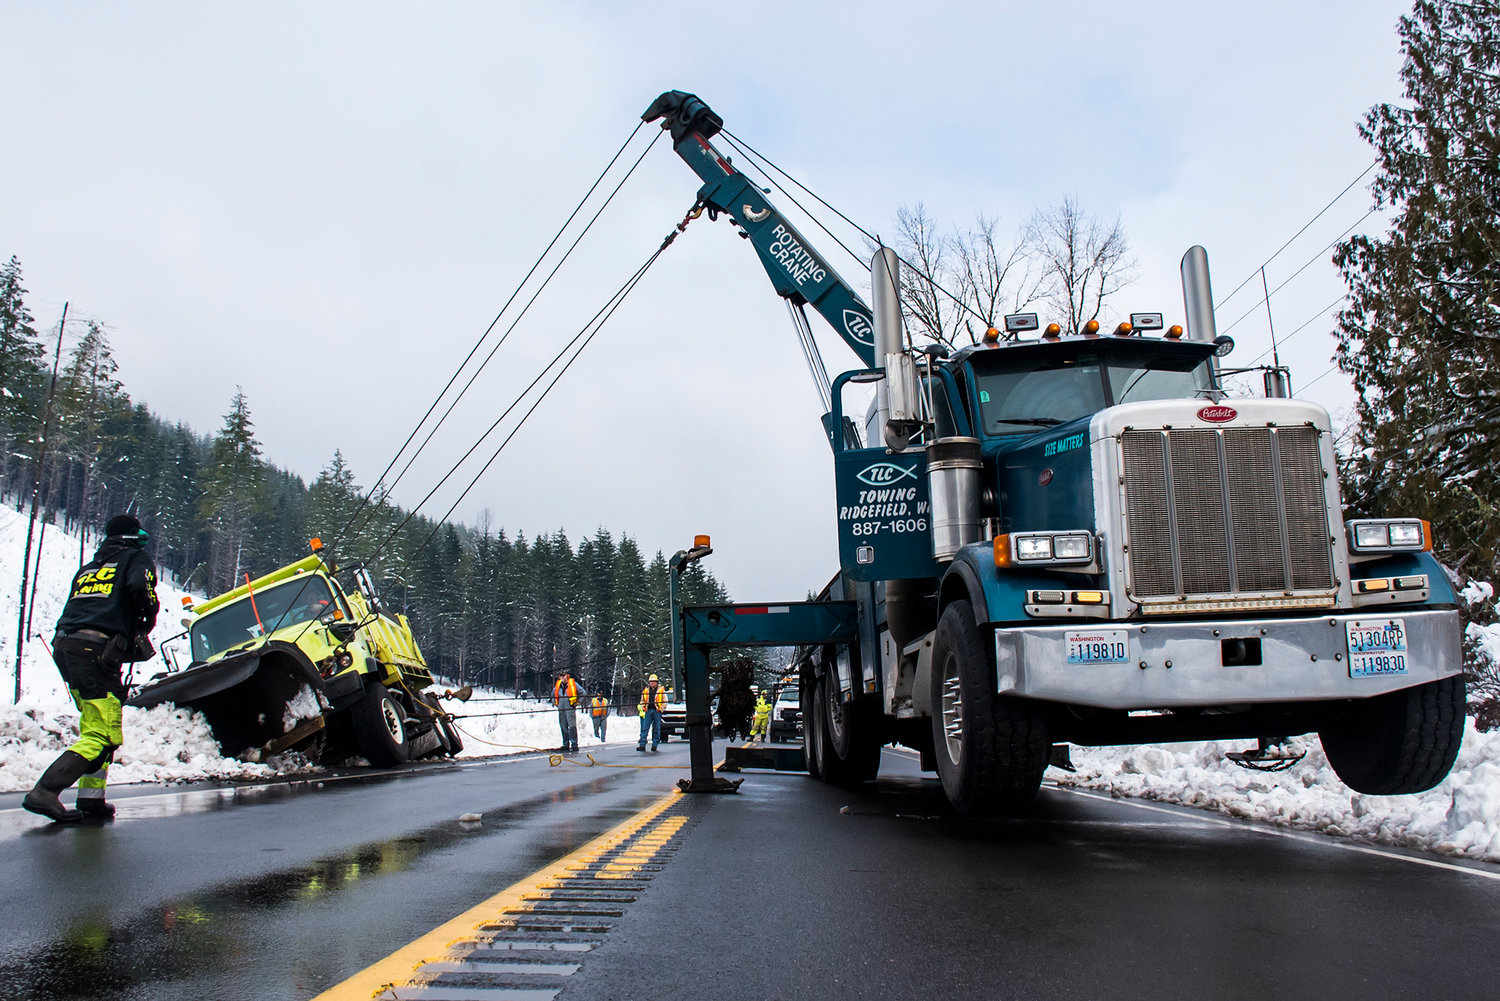 A snow plow is seen hoisted up with a crane after tipping while clearing roads along State Route 7 Wednesday morning between Morton and Mineral.